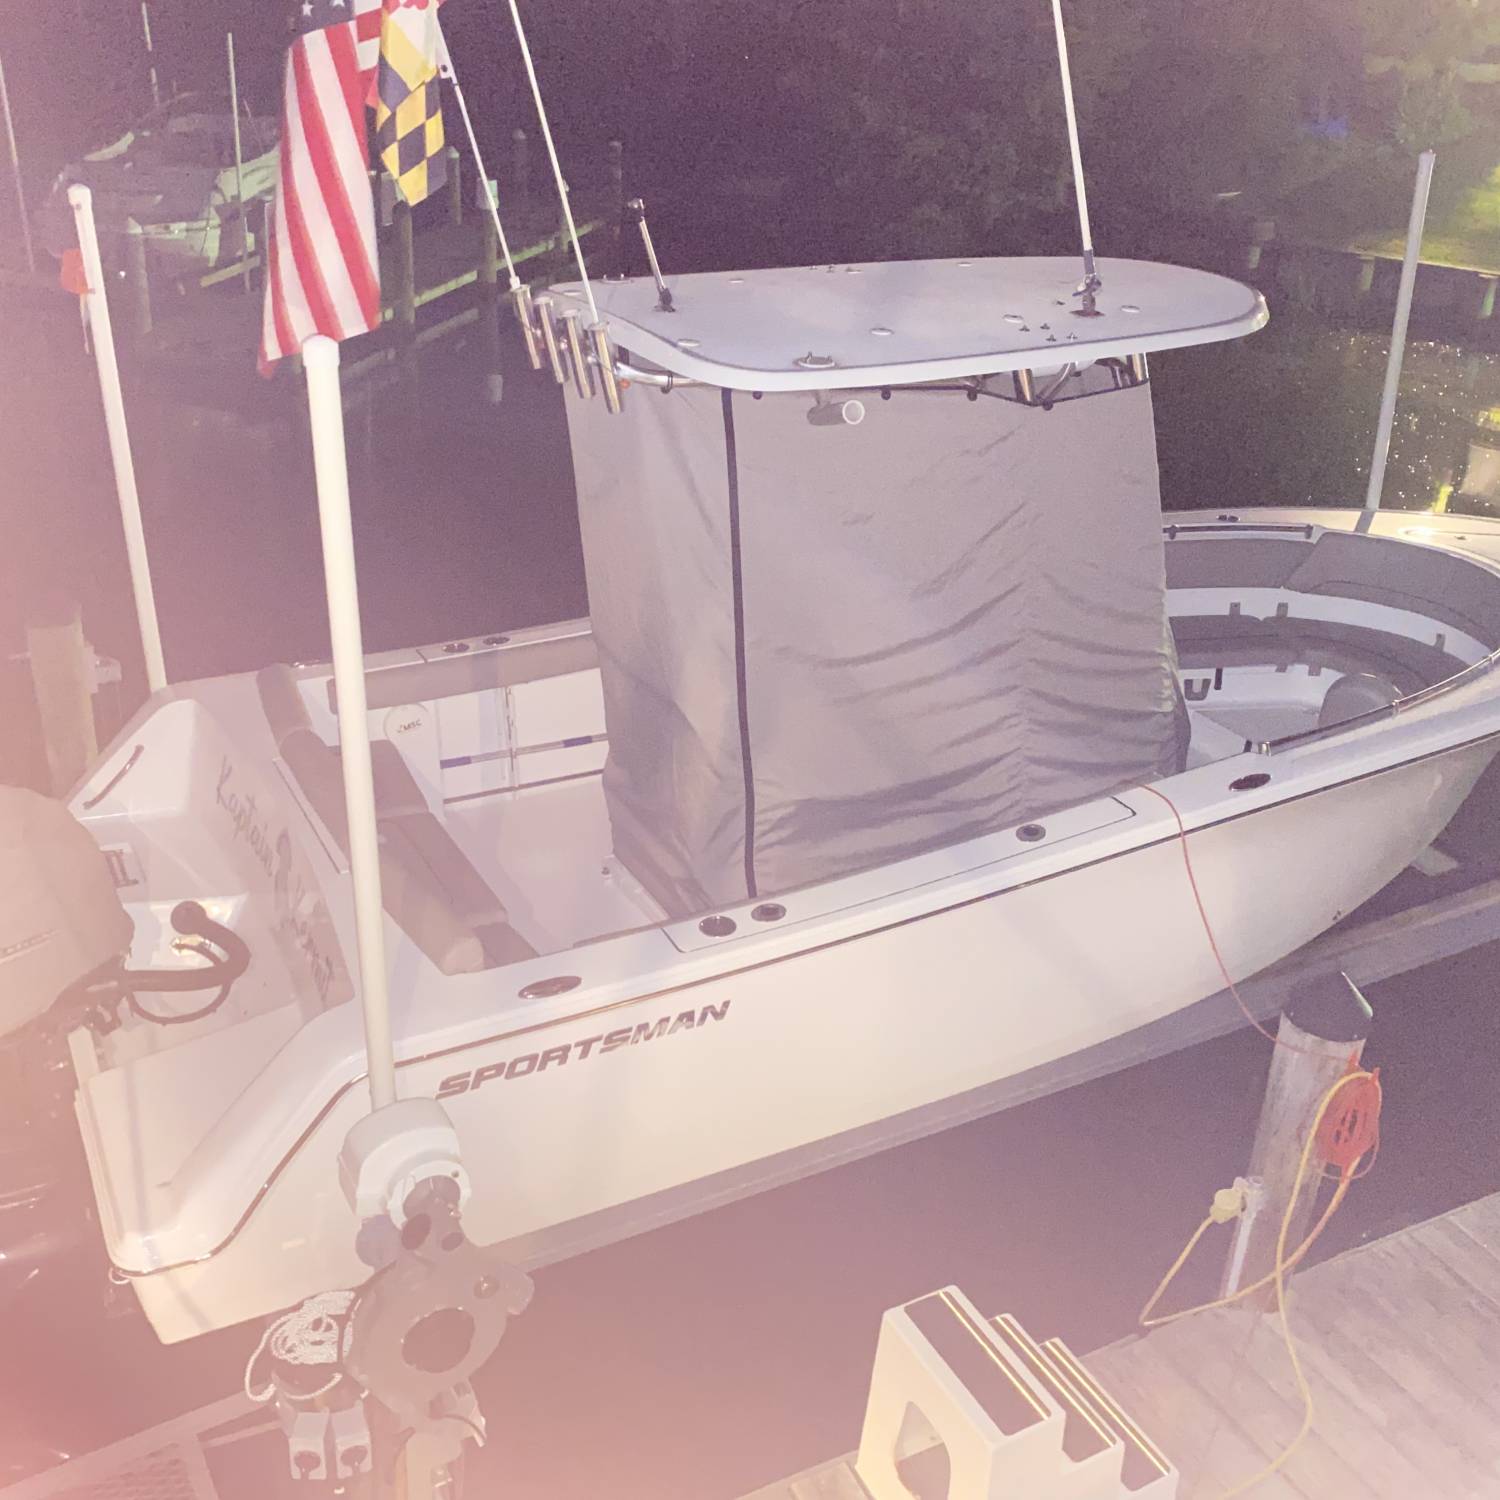 Title: Waiting - On board their Sportsman Heritage 231 Center Console - Location: Solomons Island. Participating in the Photo Contest #SportsmanApril2023